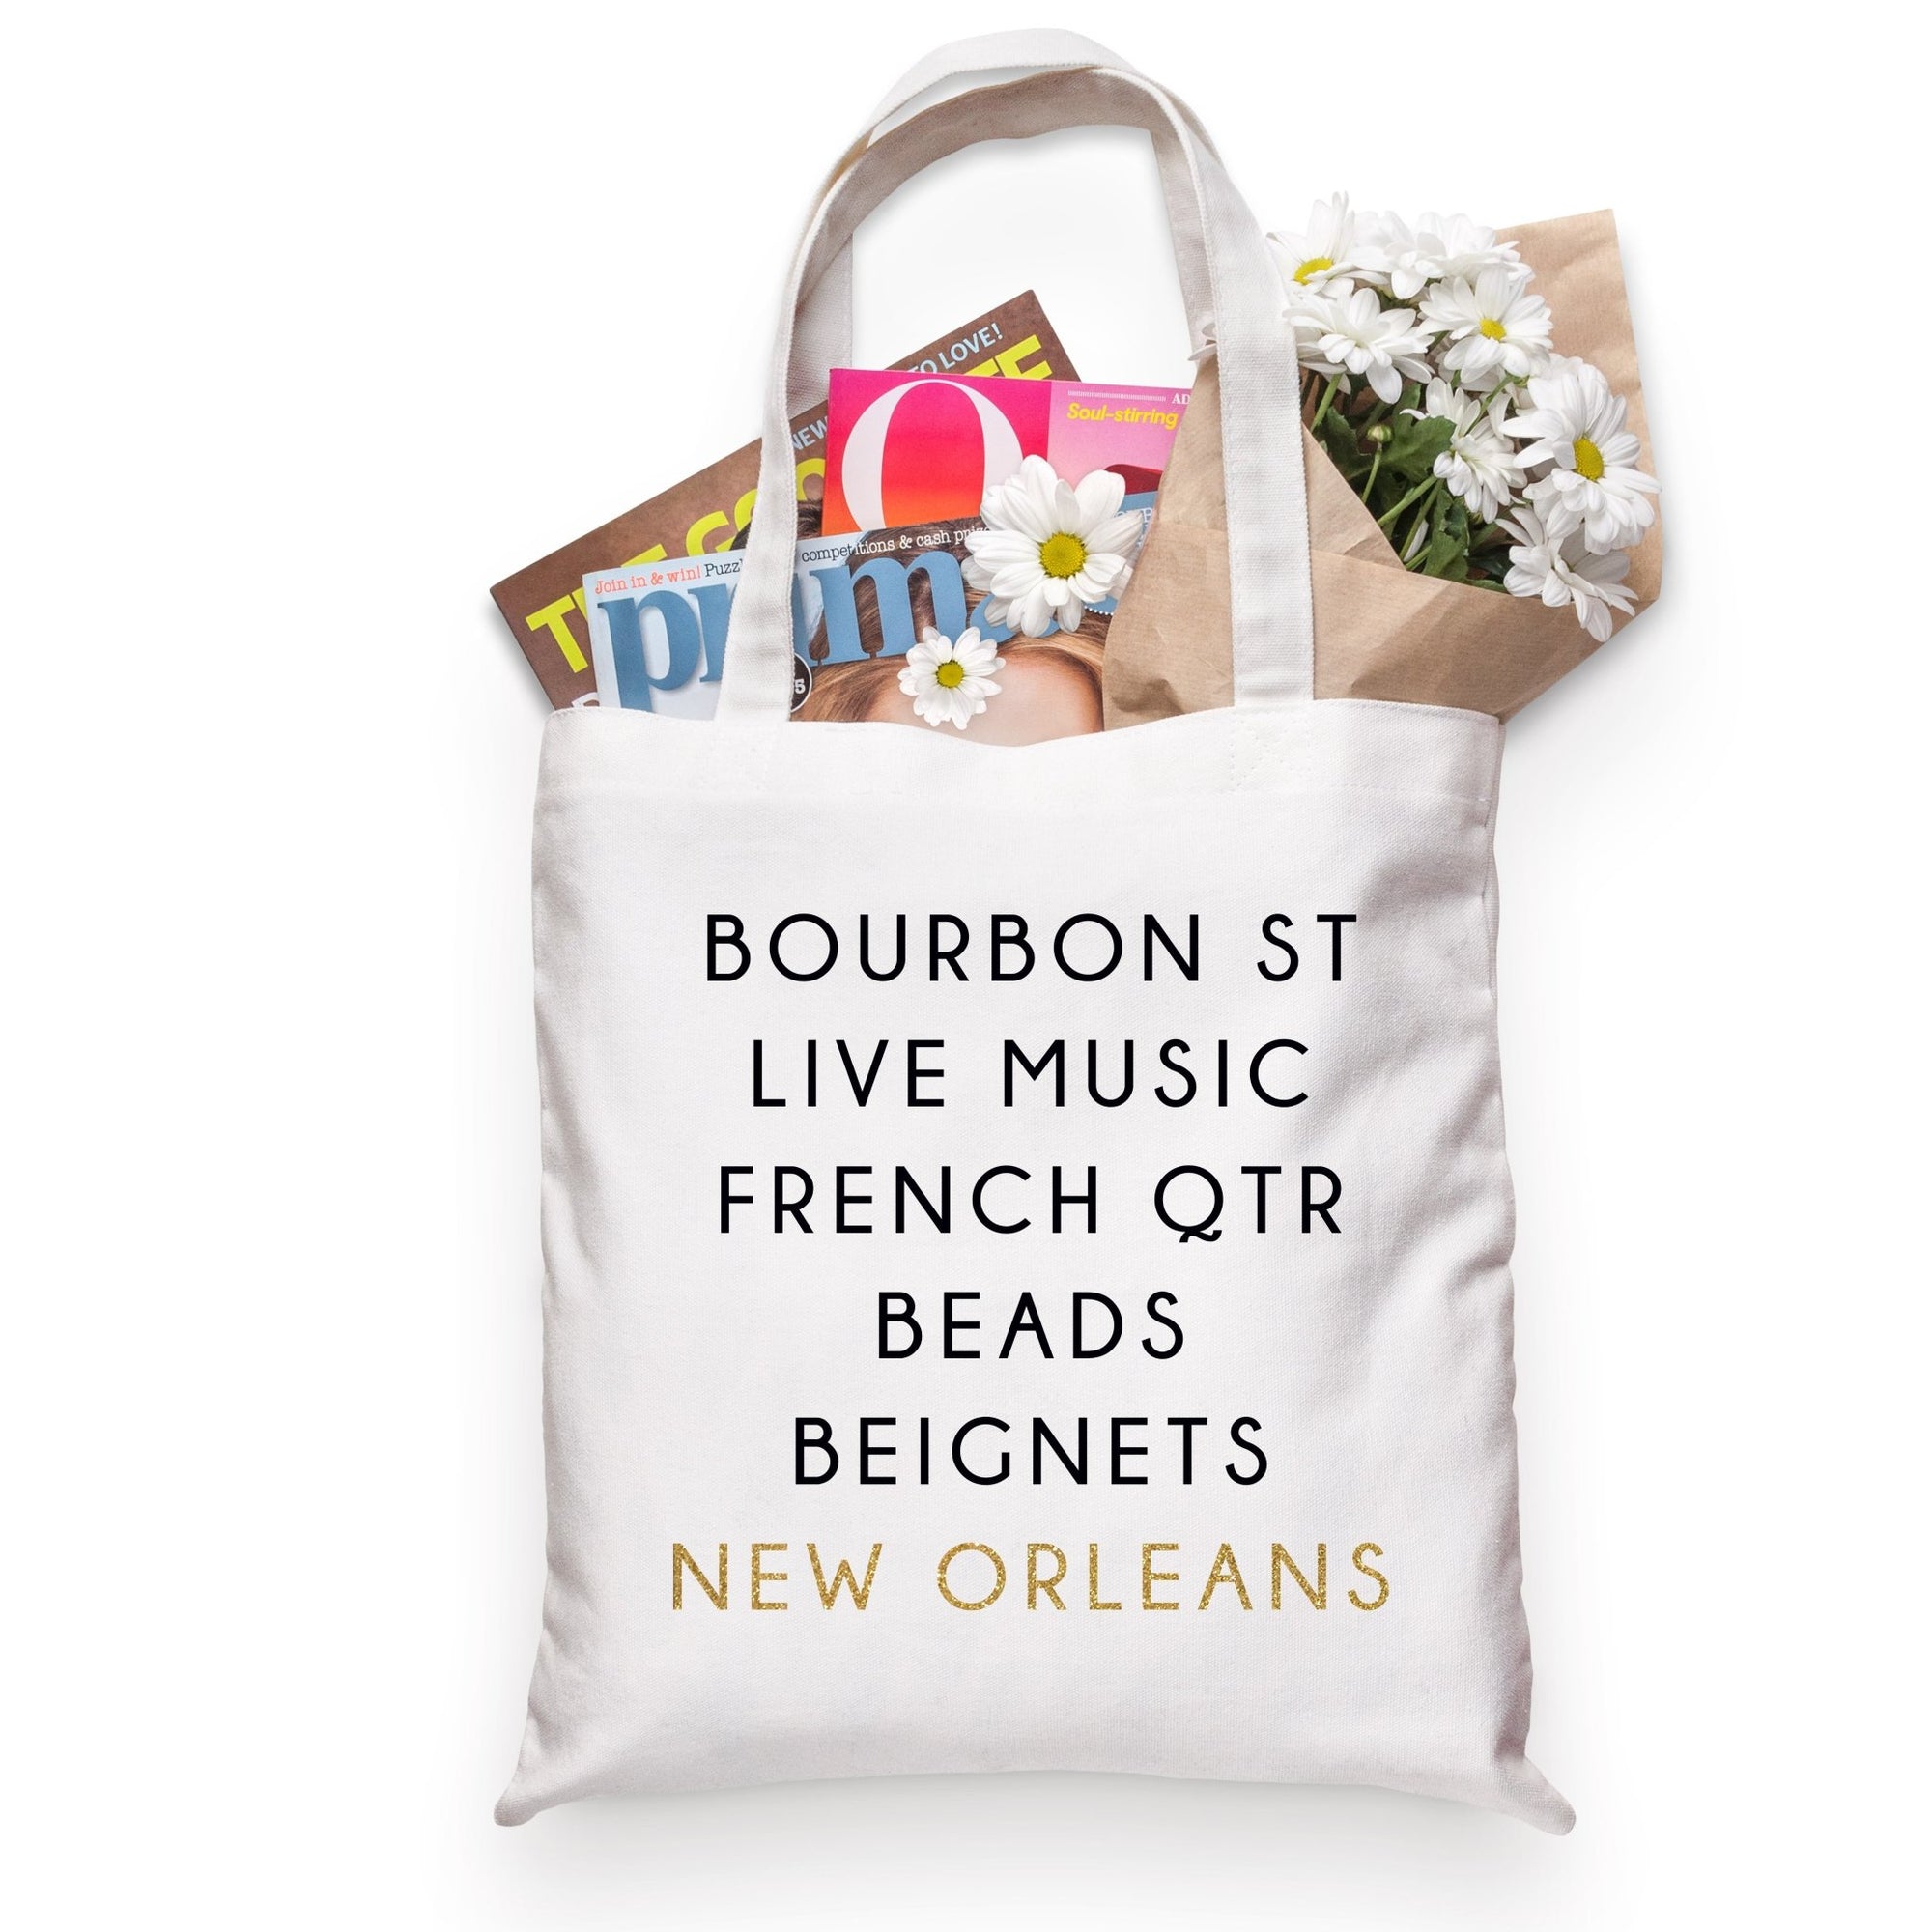 New Orleans City Tote - Sprinkled With Pink #bachelorette #custom #gifts